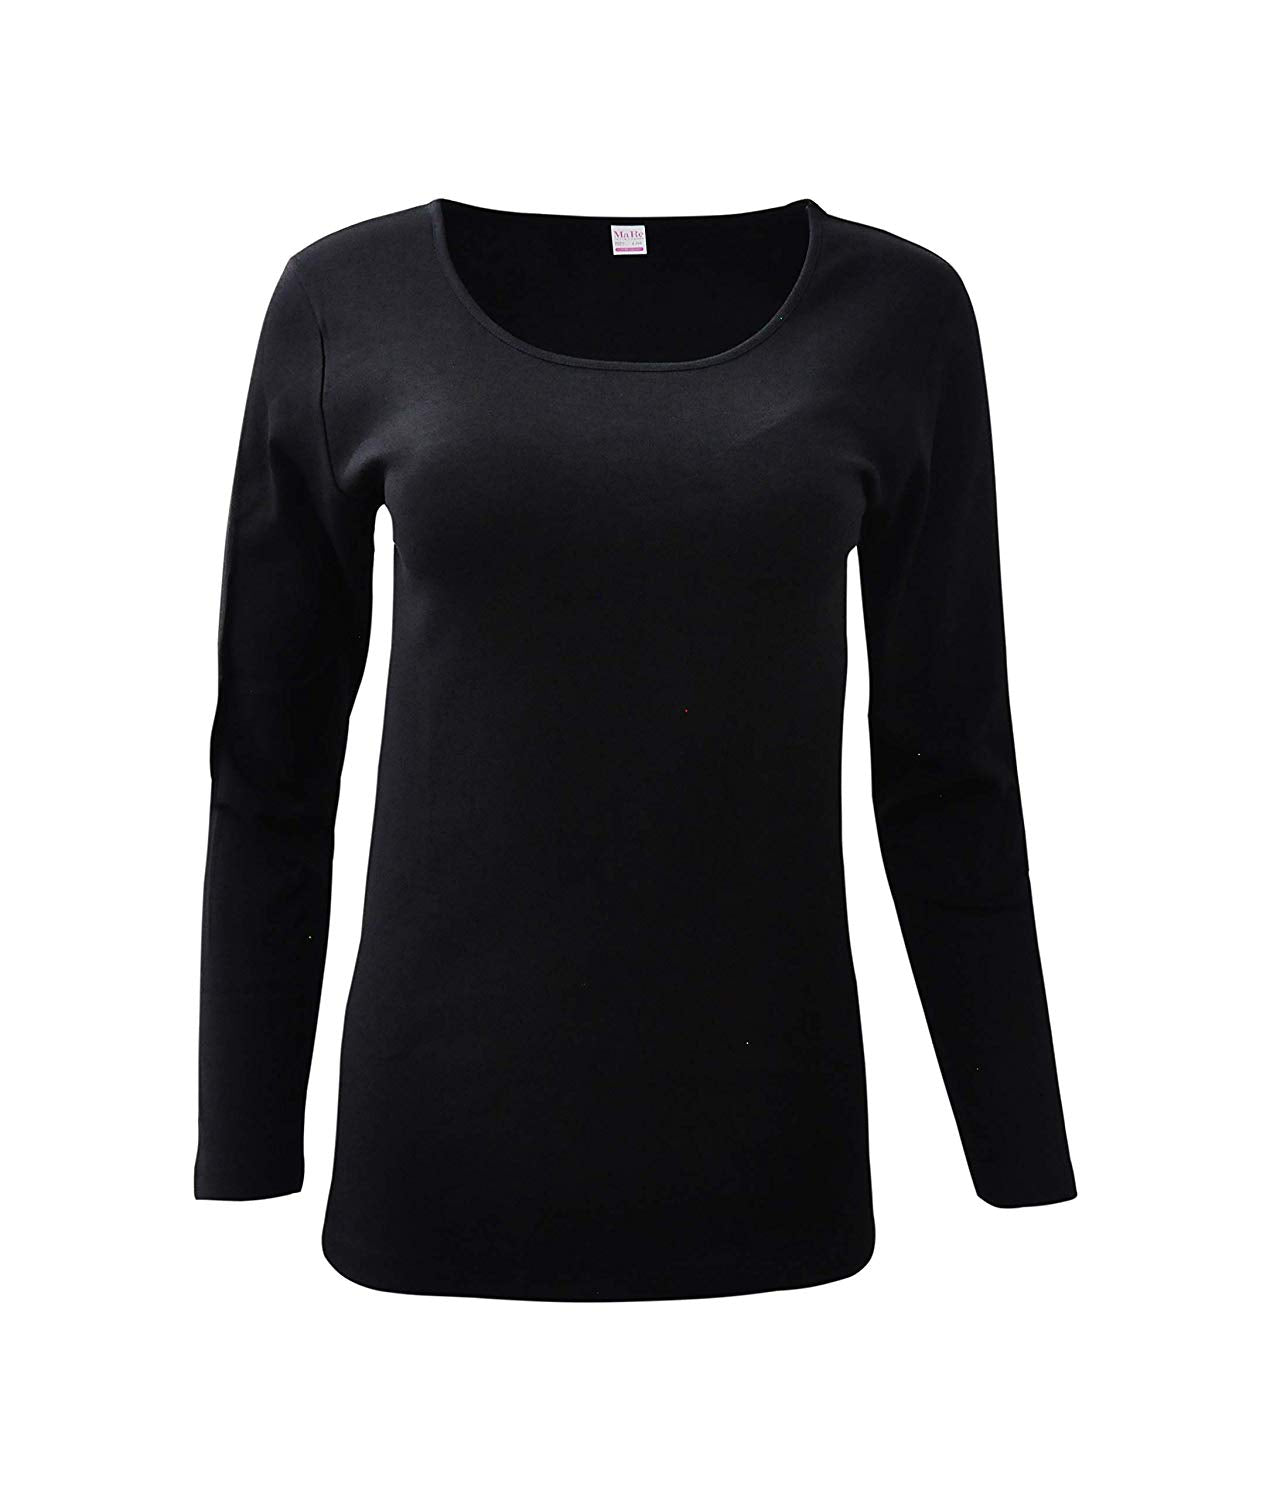 MaRe Premium Quality 100% Brushed Cotton Women's Long Sleeve T-Shirt S